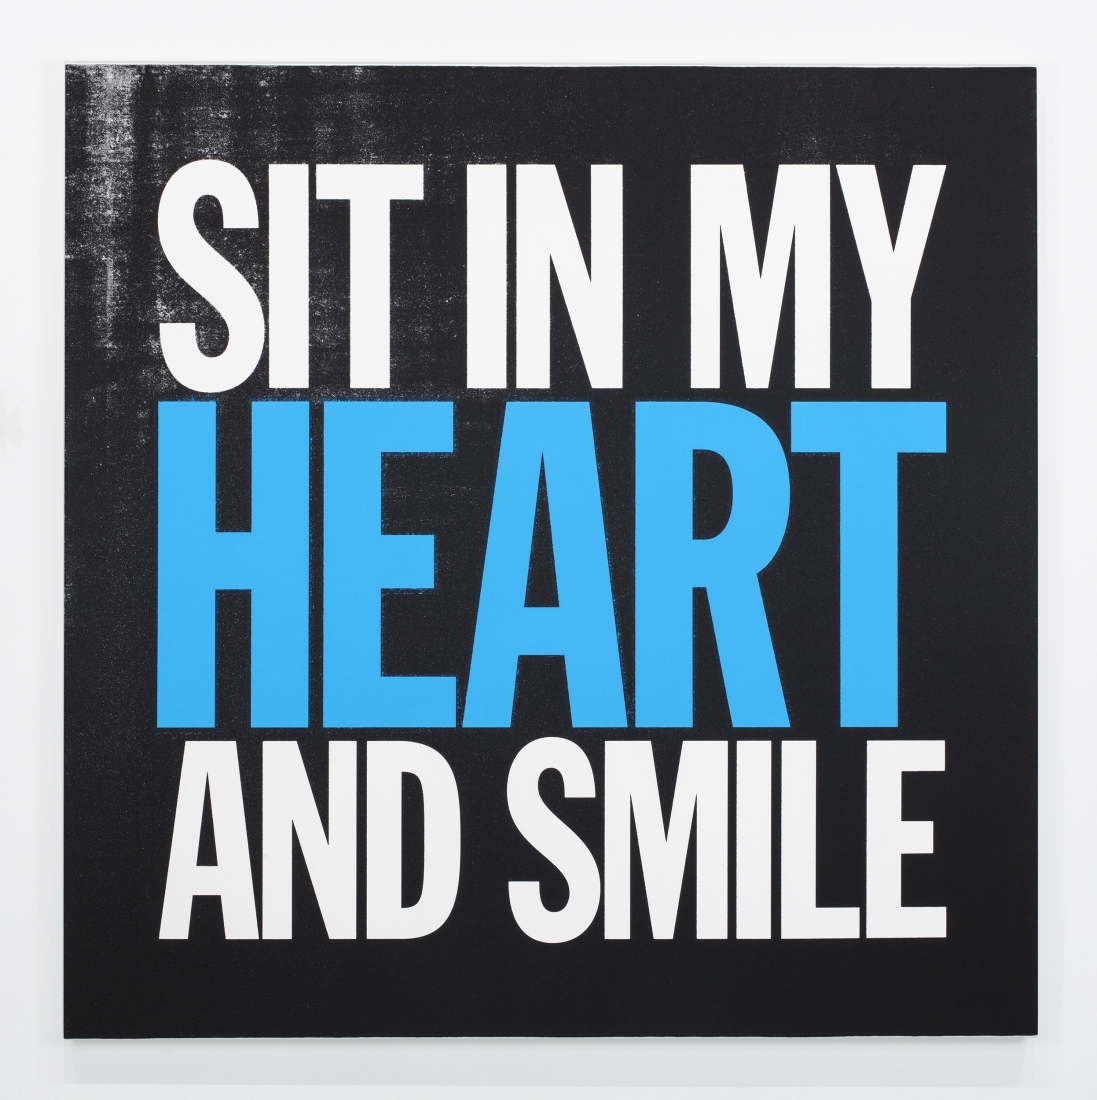 John&amp;nbsp;Giorno
SIT IN MY HEART AND SMILE, 2017
acrylic on canvas
48 x 48 inches (121,9 x 121,9 cm)
SW 21026
&amp;nbsp;